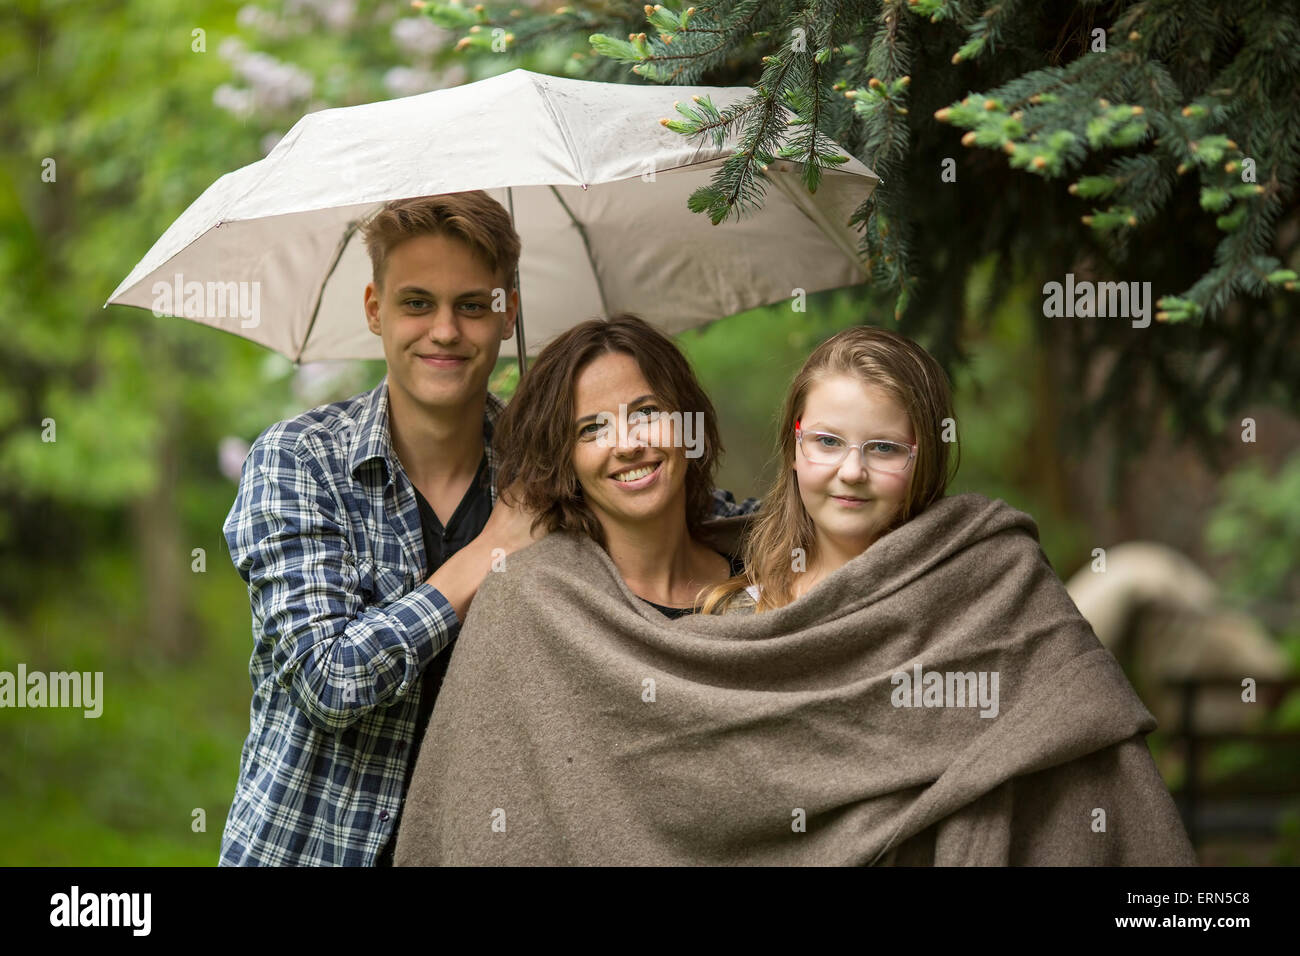 Woman with their adult children, daughter and son, in the Park under an umbrella. Stock Photo